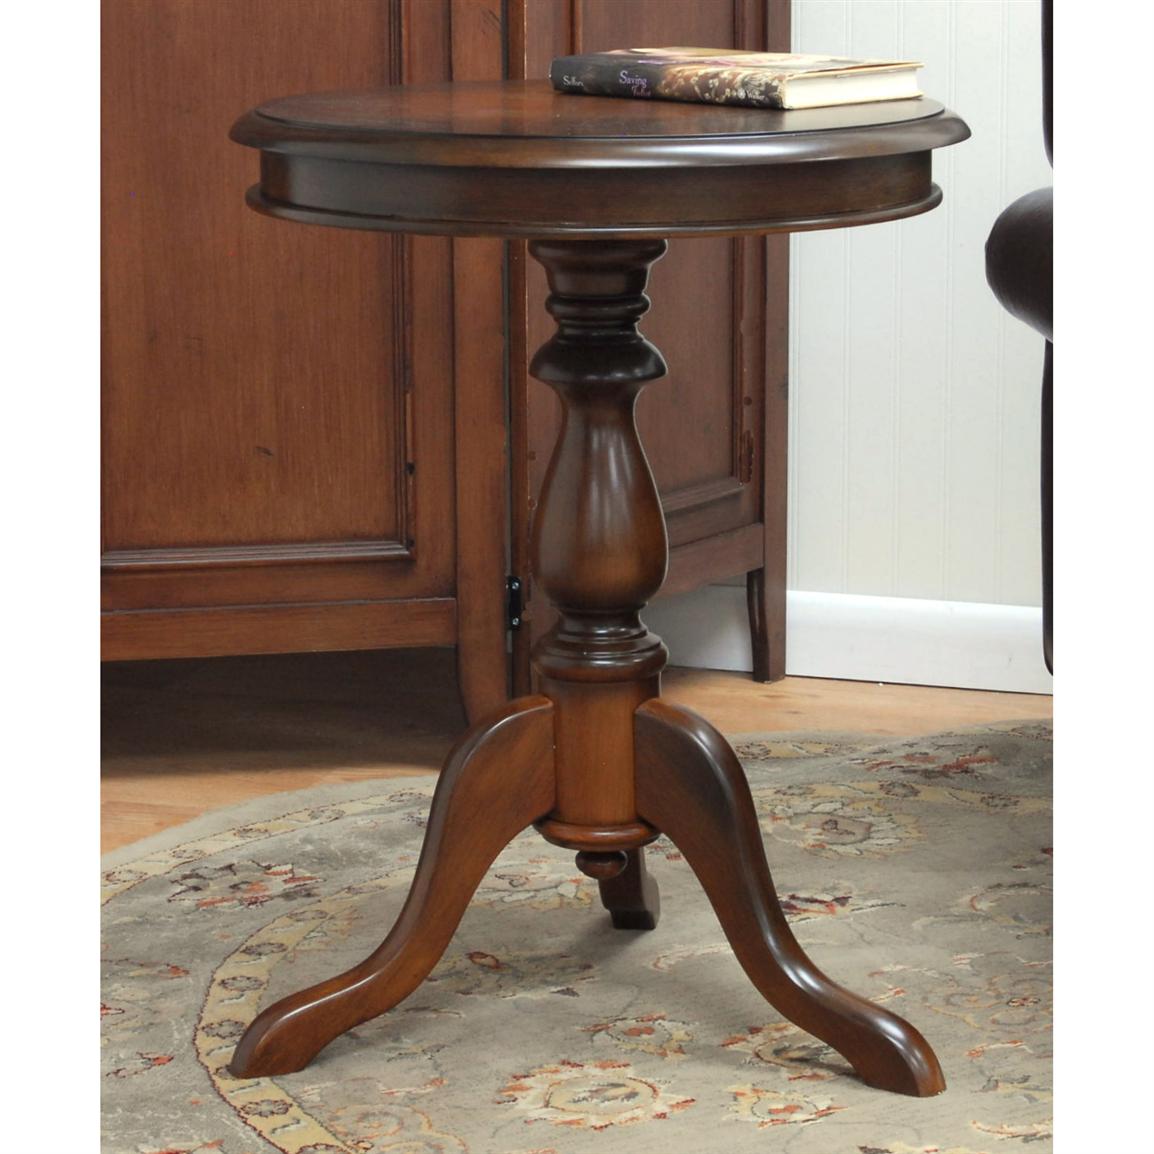 carolina chair table hepburn pedestal accent chestnut curio display cabinet cherry wood dining room furniture formal pottery barn desk small outdoor end home goods sofa household